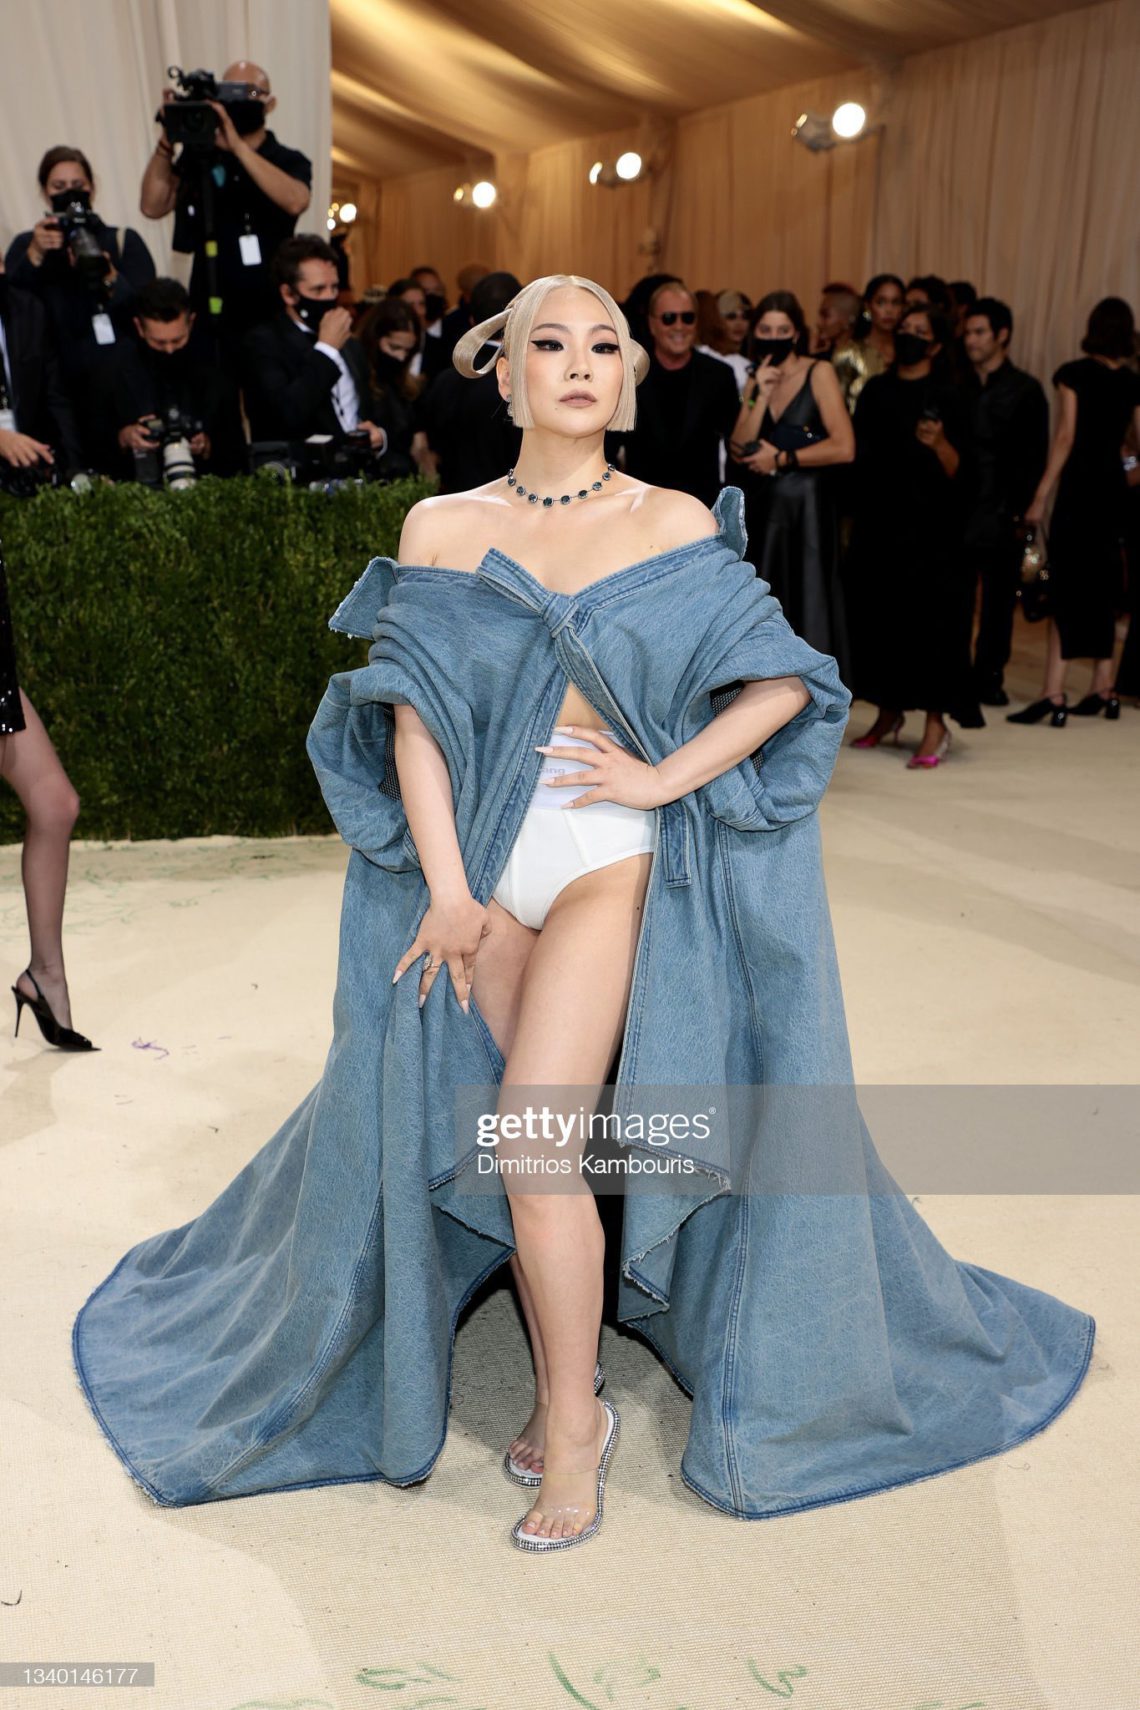 BLACKPINK Rosé and CL (Lee Chae Rin) Attending Met Gala 2021: The First ...